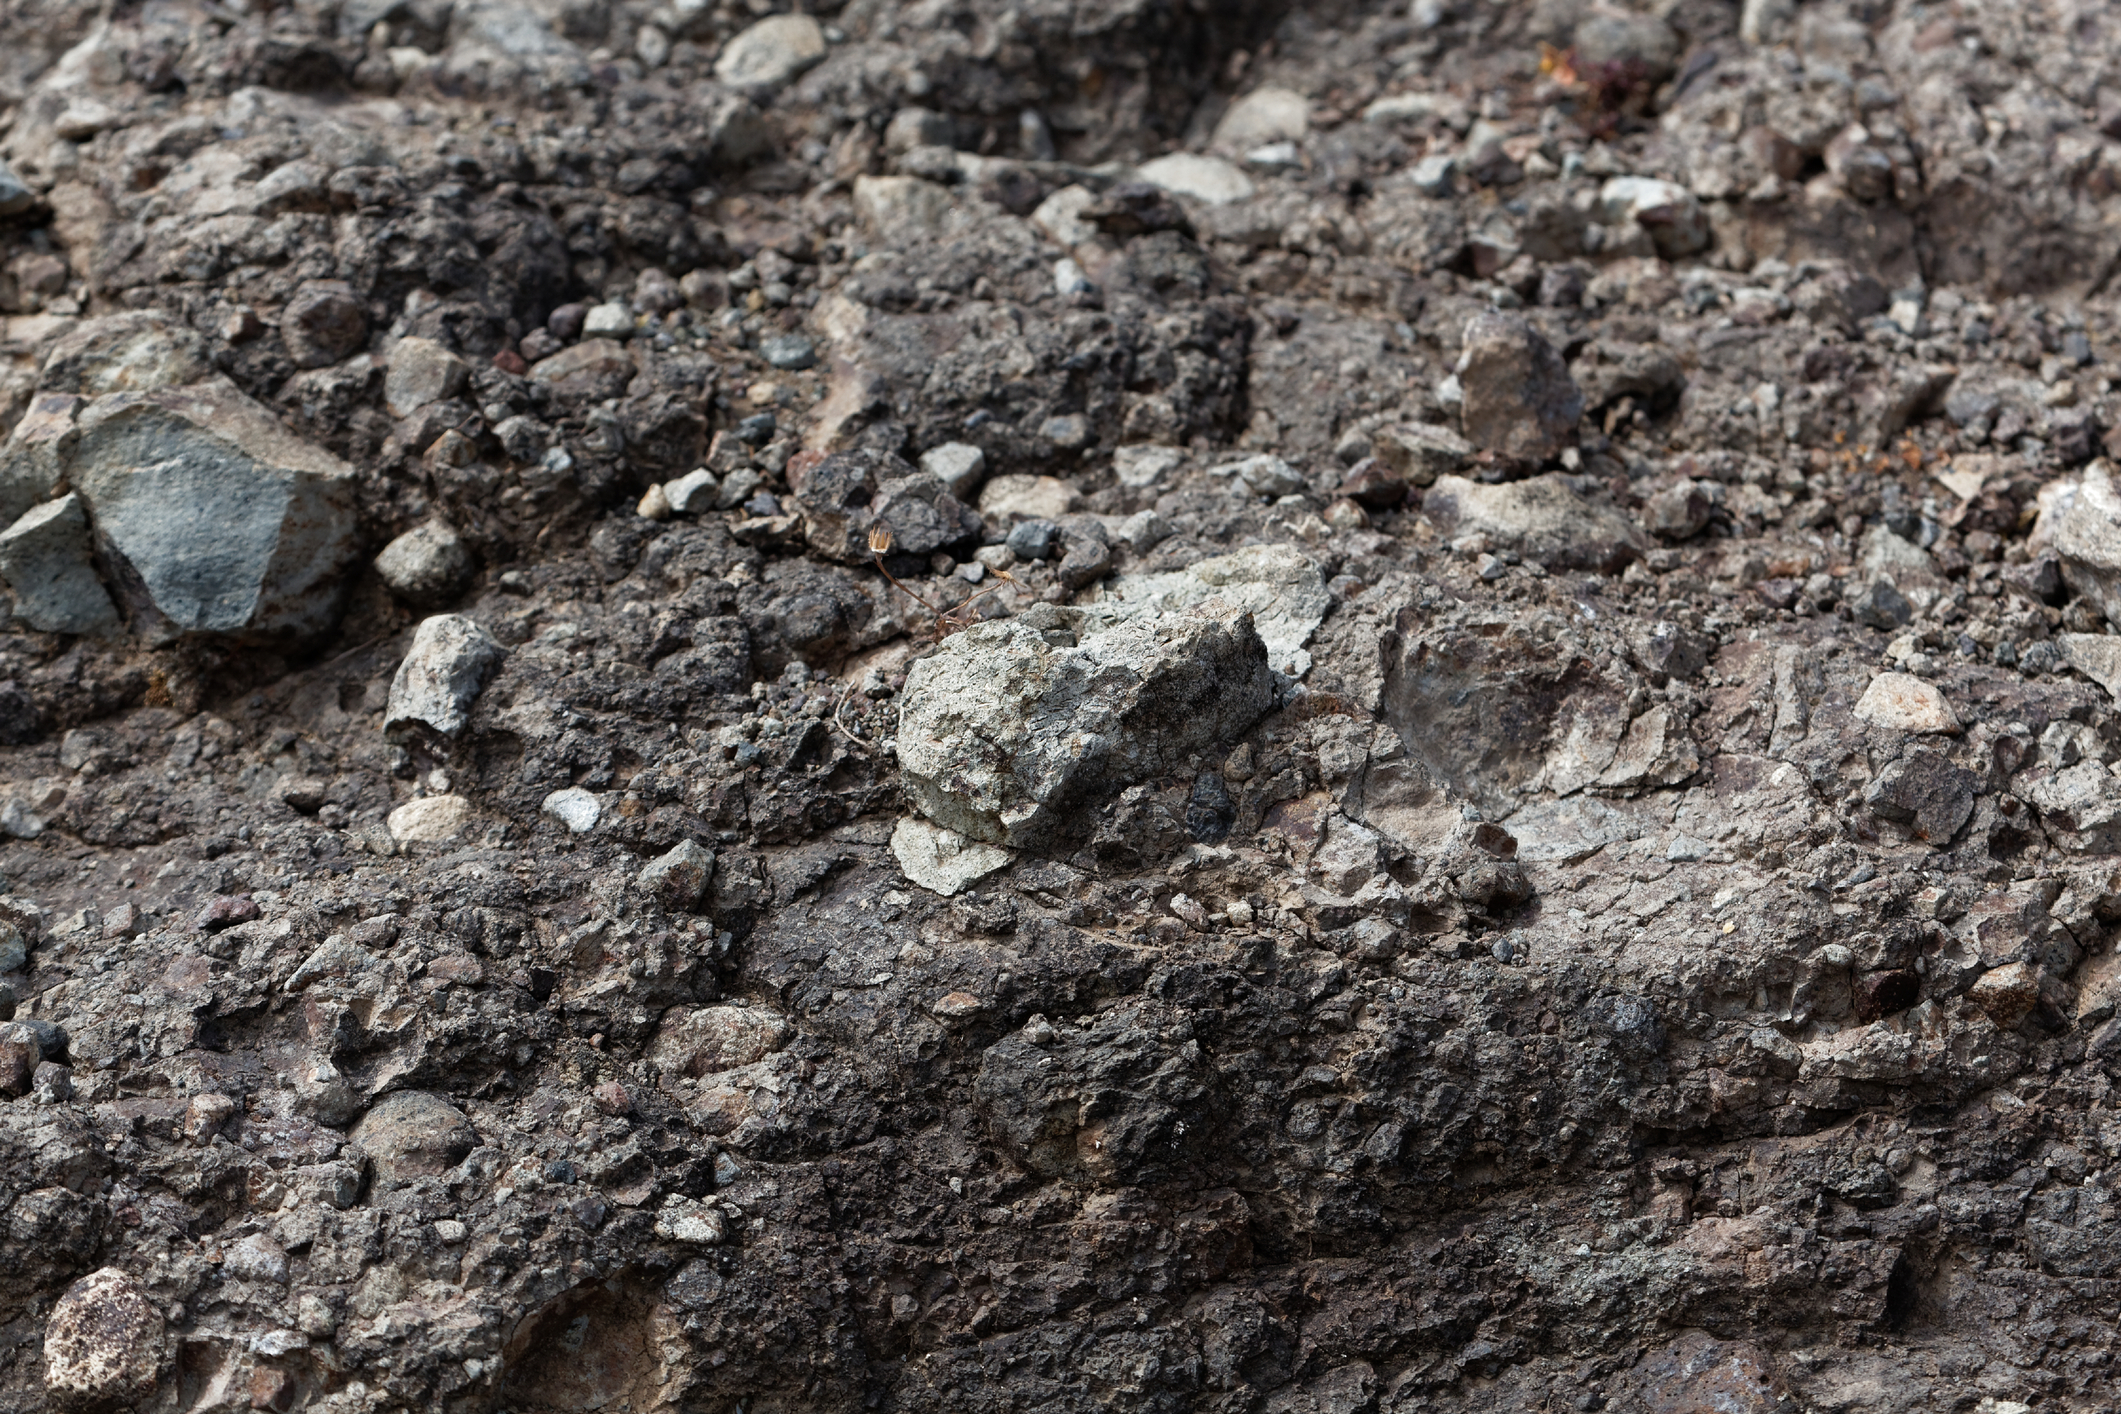 Pyroclastic Breccia, formed from a volcanic eruption